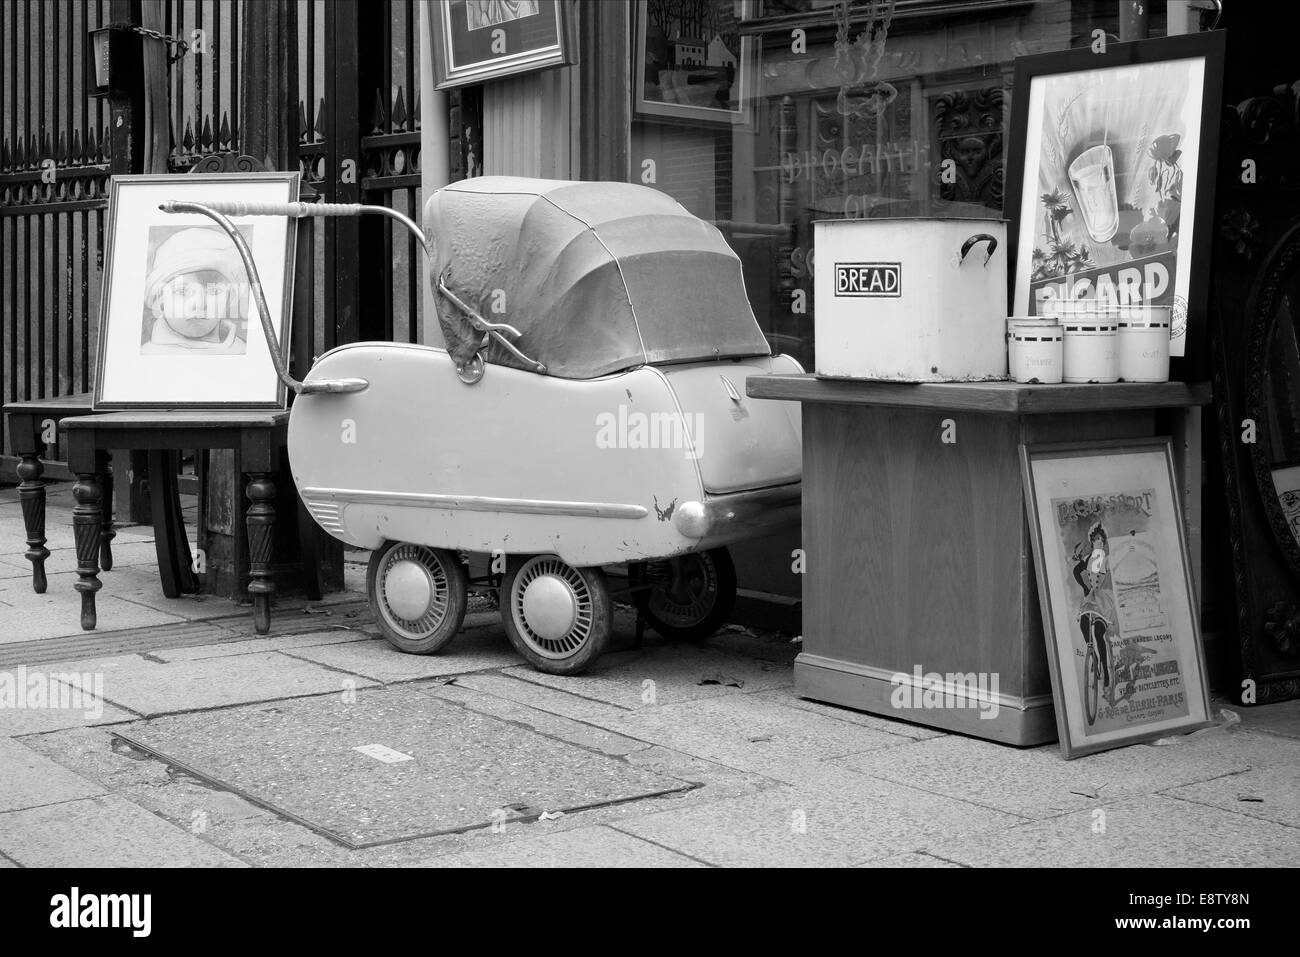 antiques and curios including an old pram displayed for sale outside of a shop england uk Stock Photo